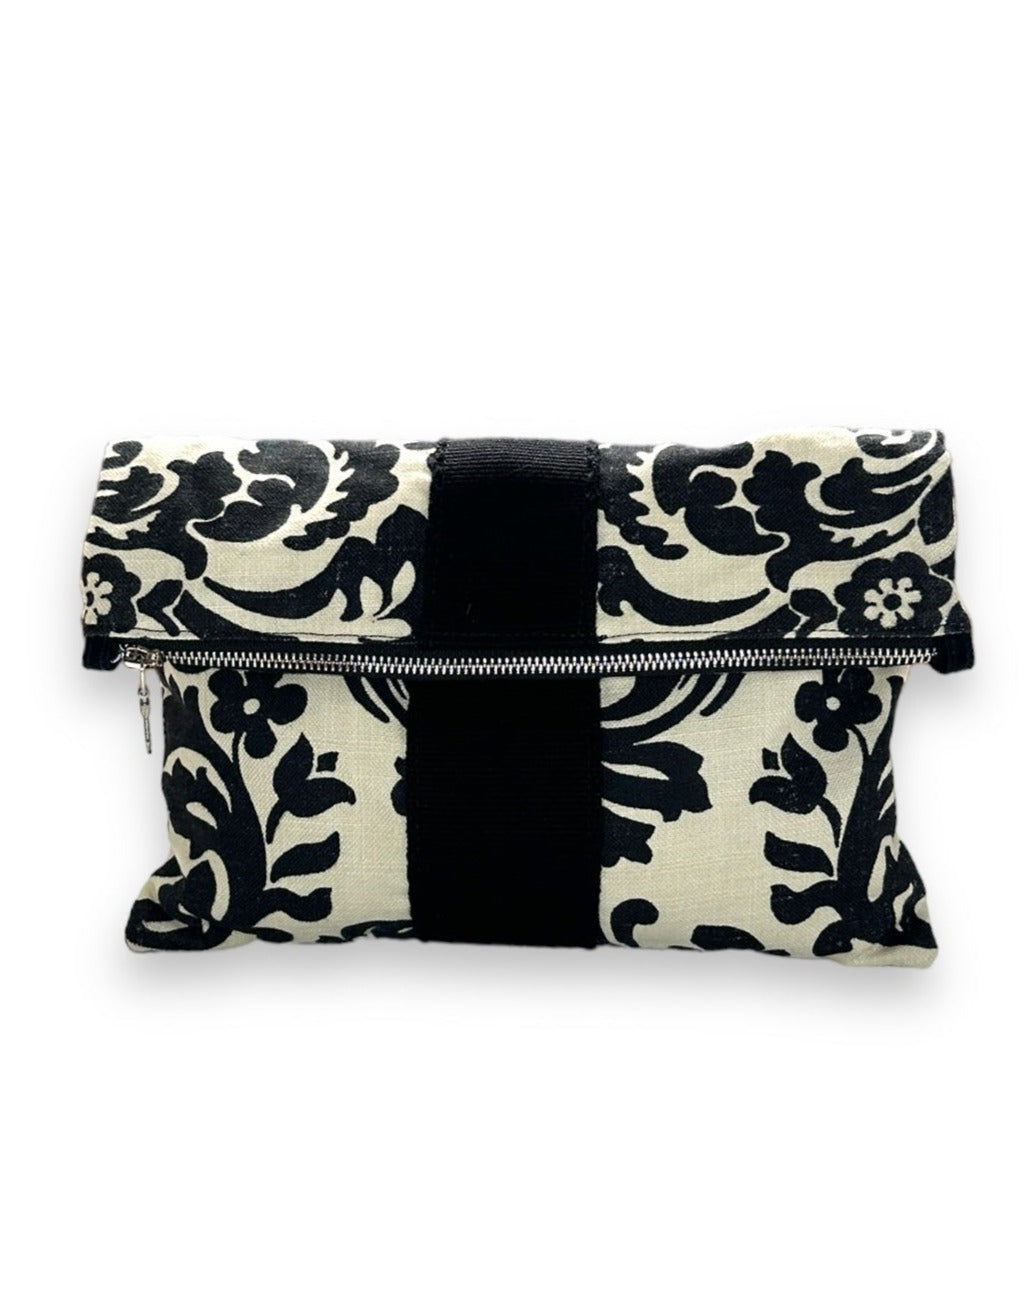 Foldover clutch and crossbody bag in one!